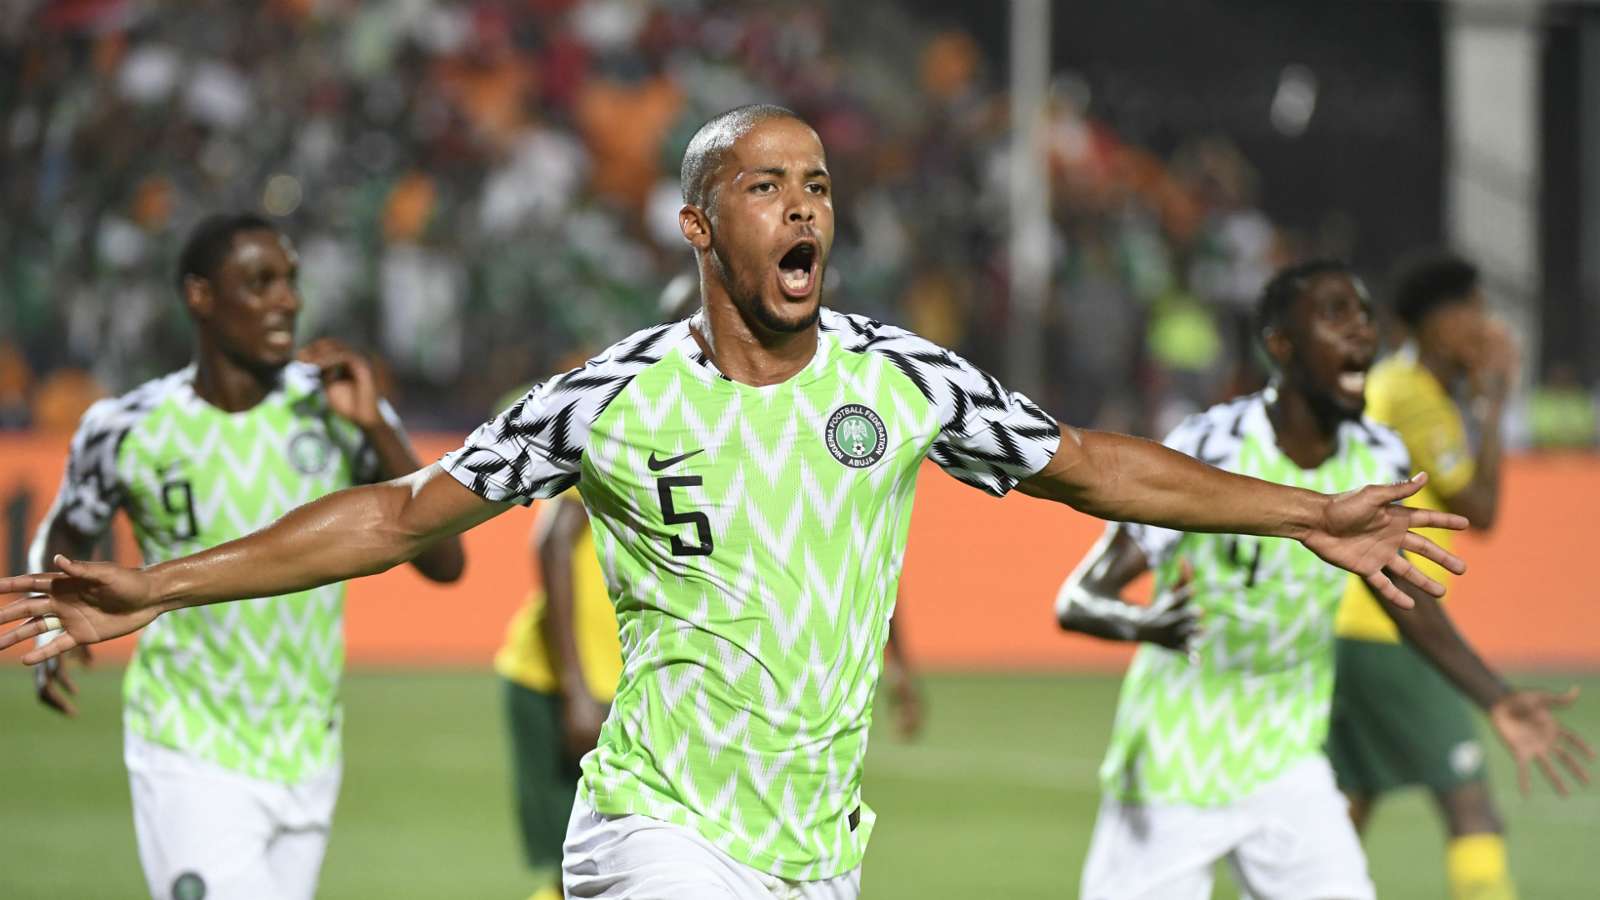 Nigeria defeats South Africa to reach Cup of Nations semis